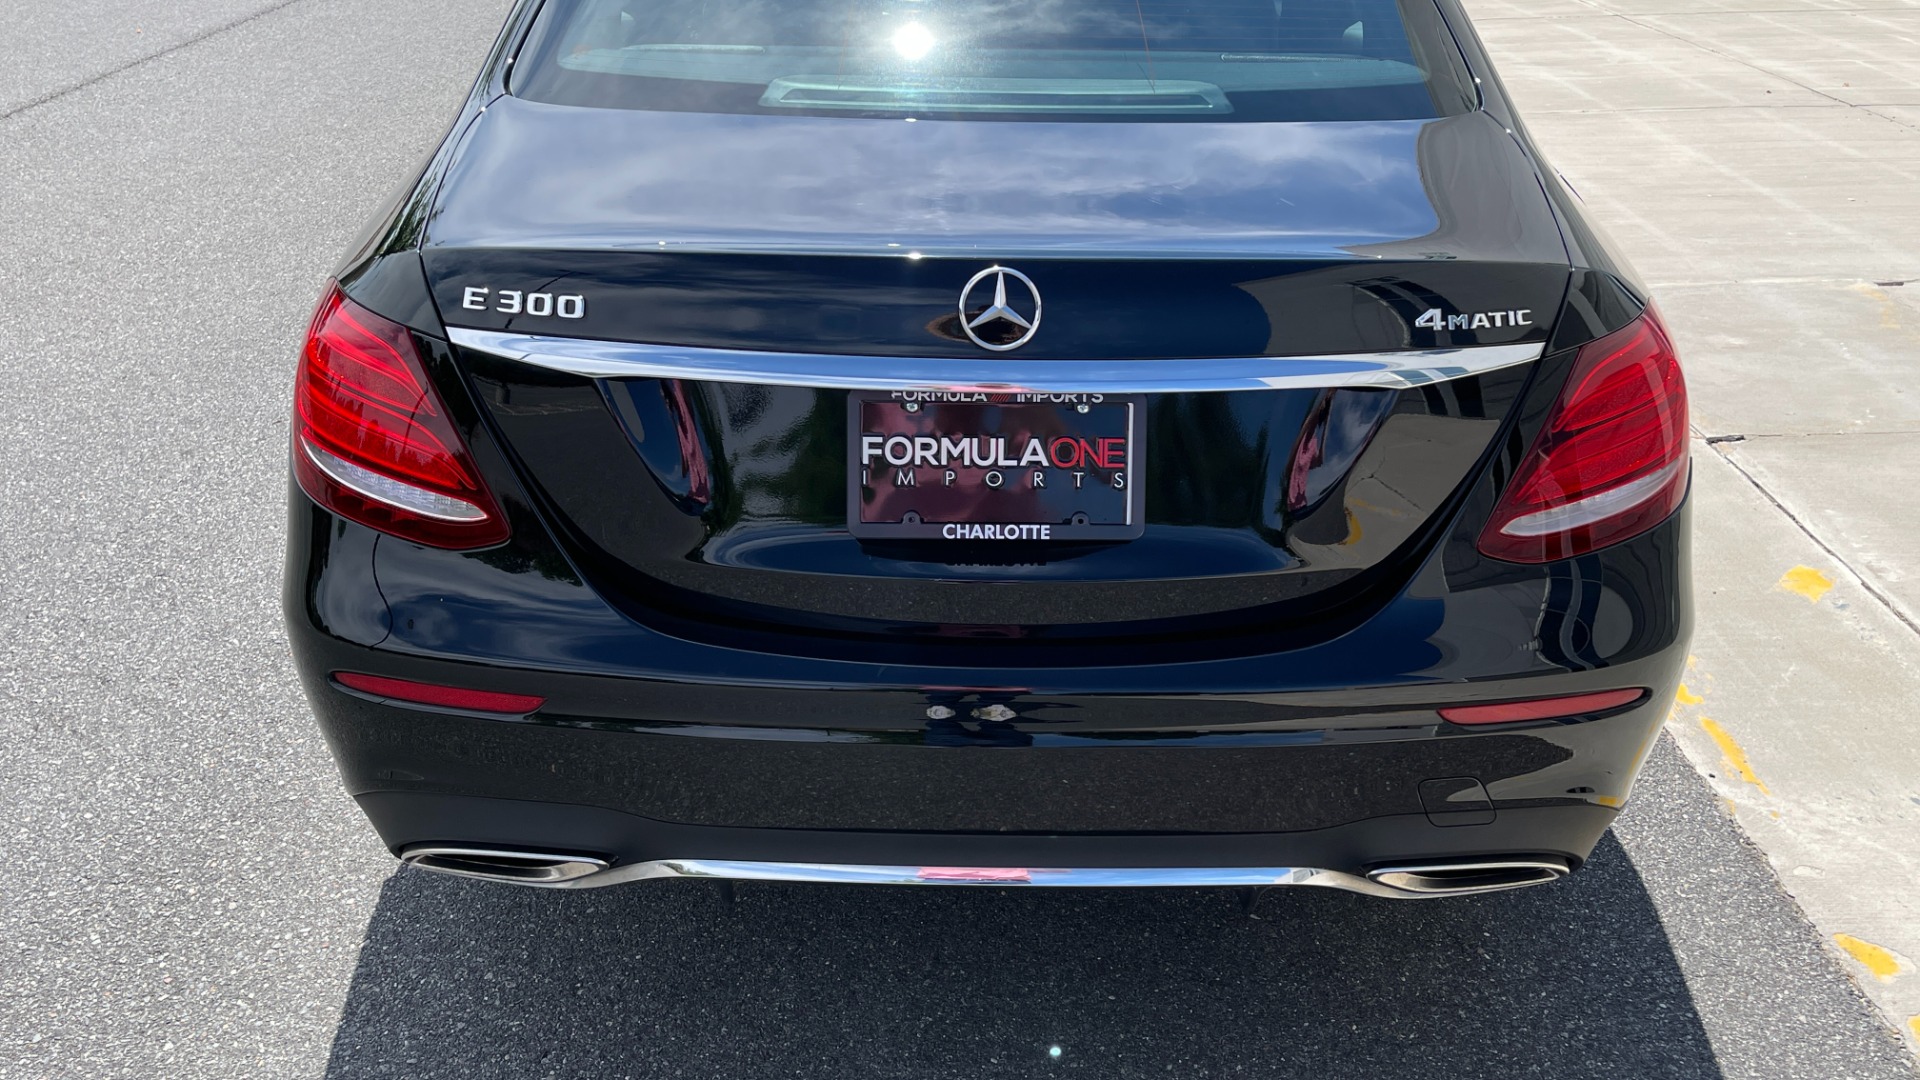 Used 2019 Mercedes-Benz E-Class E300 / 4MATIC / BURMESTER SOUND / PREMIUM PACKAGE / BLIND SPOT ASSIST for sale Sold at Formula Imports in Charlotte NC 28227 9